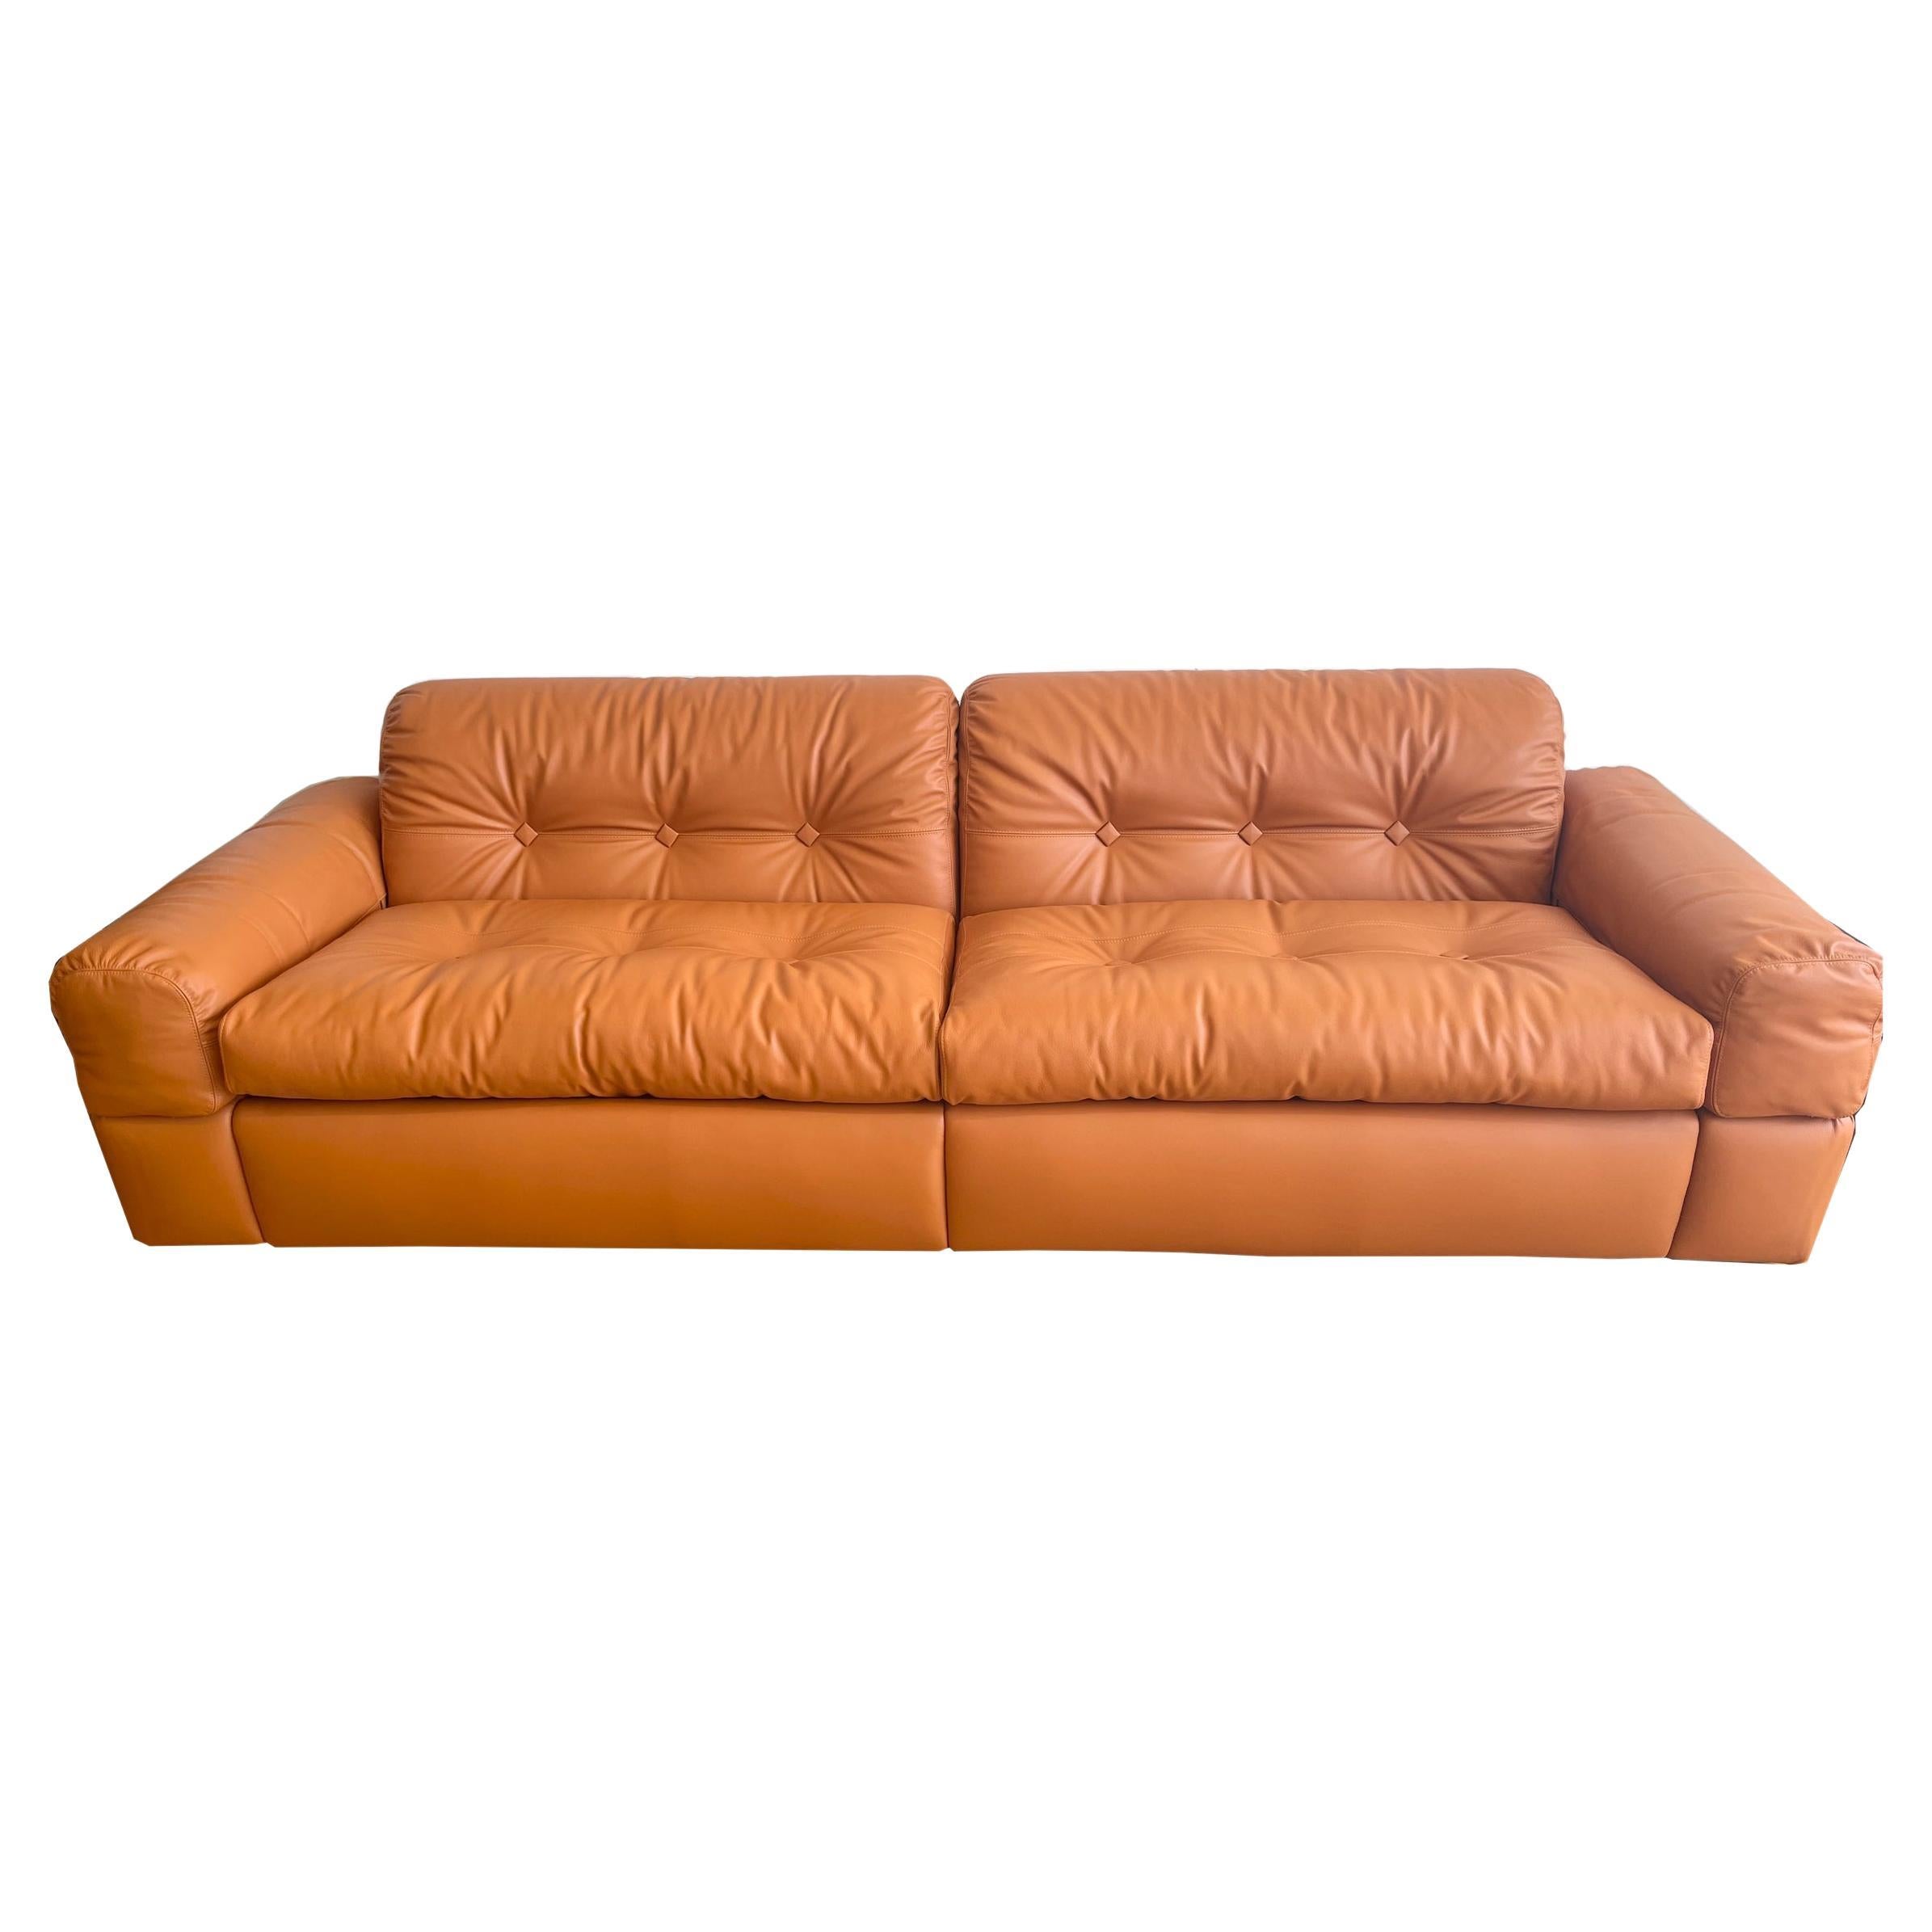 Adriano Piazzesi 1970s Sofa Newly Upholstered with Copper Brown Italian Leather For Sale